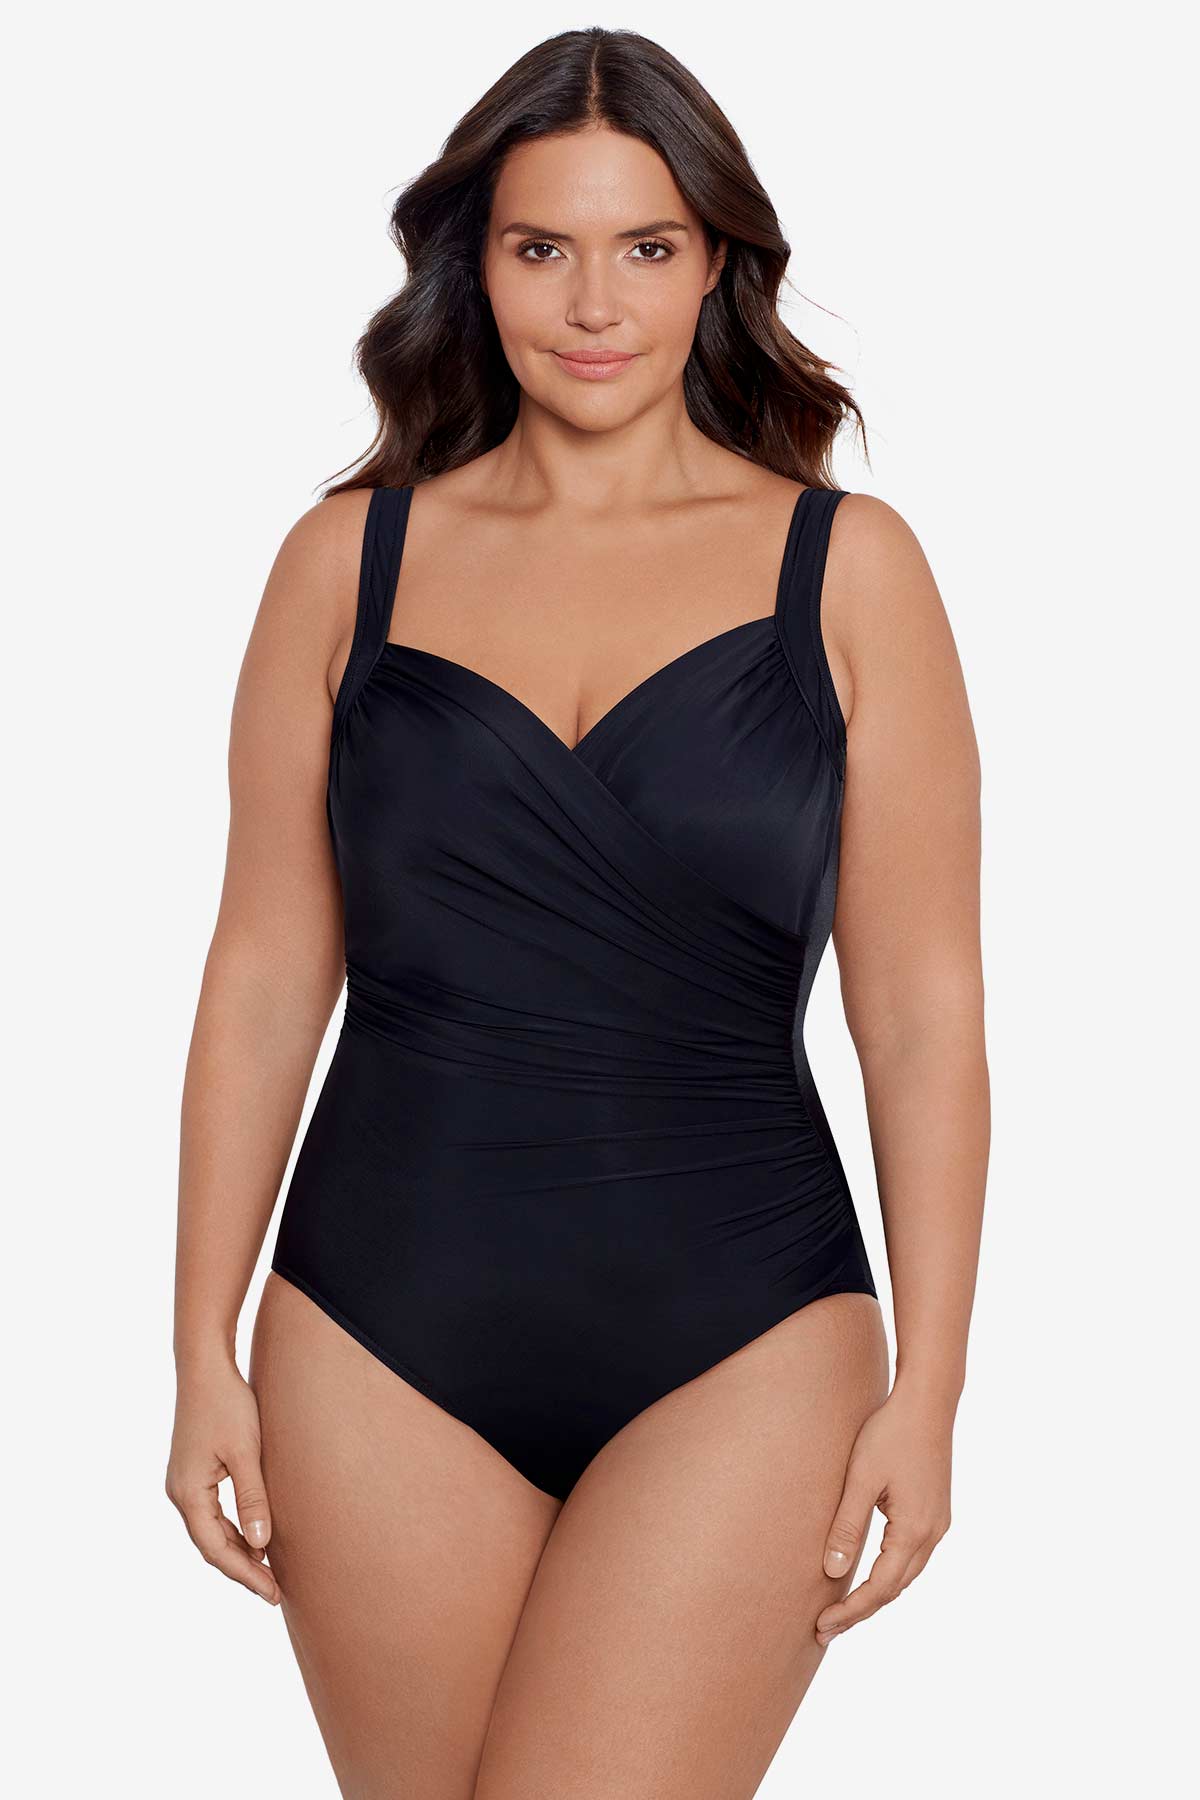 Tummy Control Plus Size Swimwear - Miraclesuit Colorblock Helix One Piece